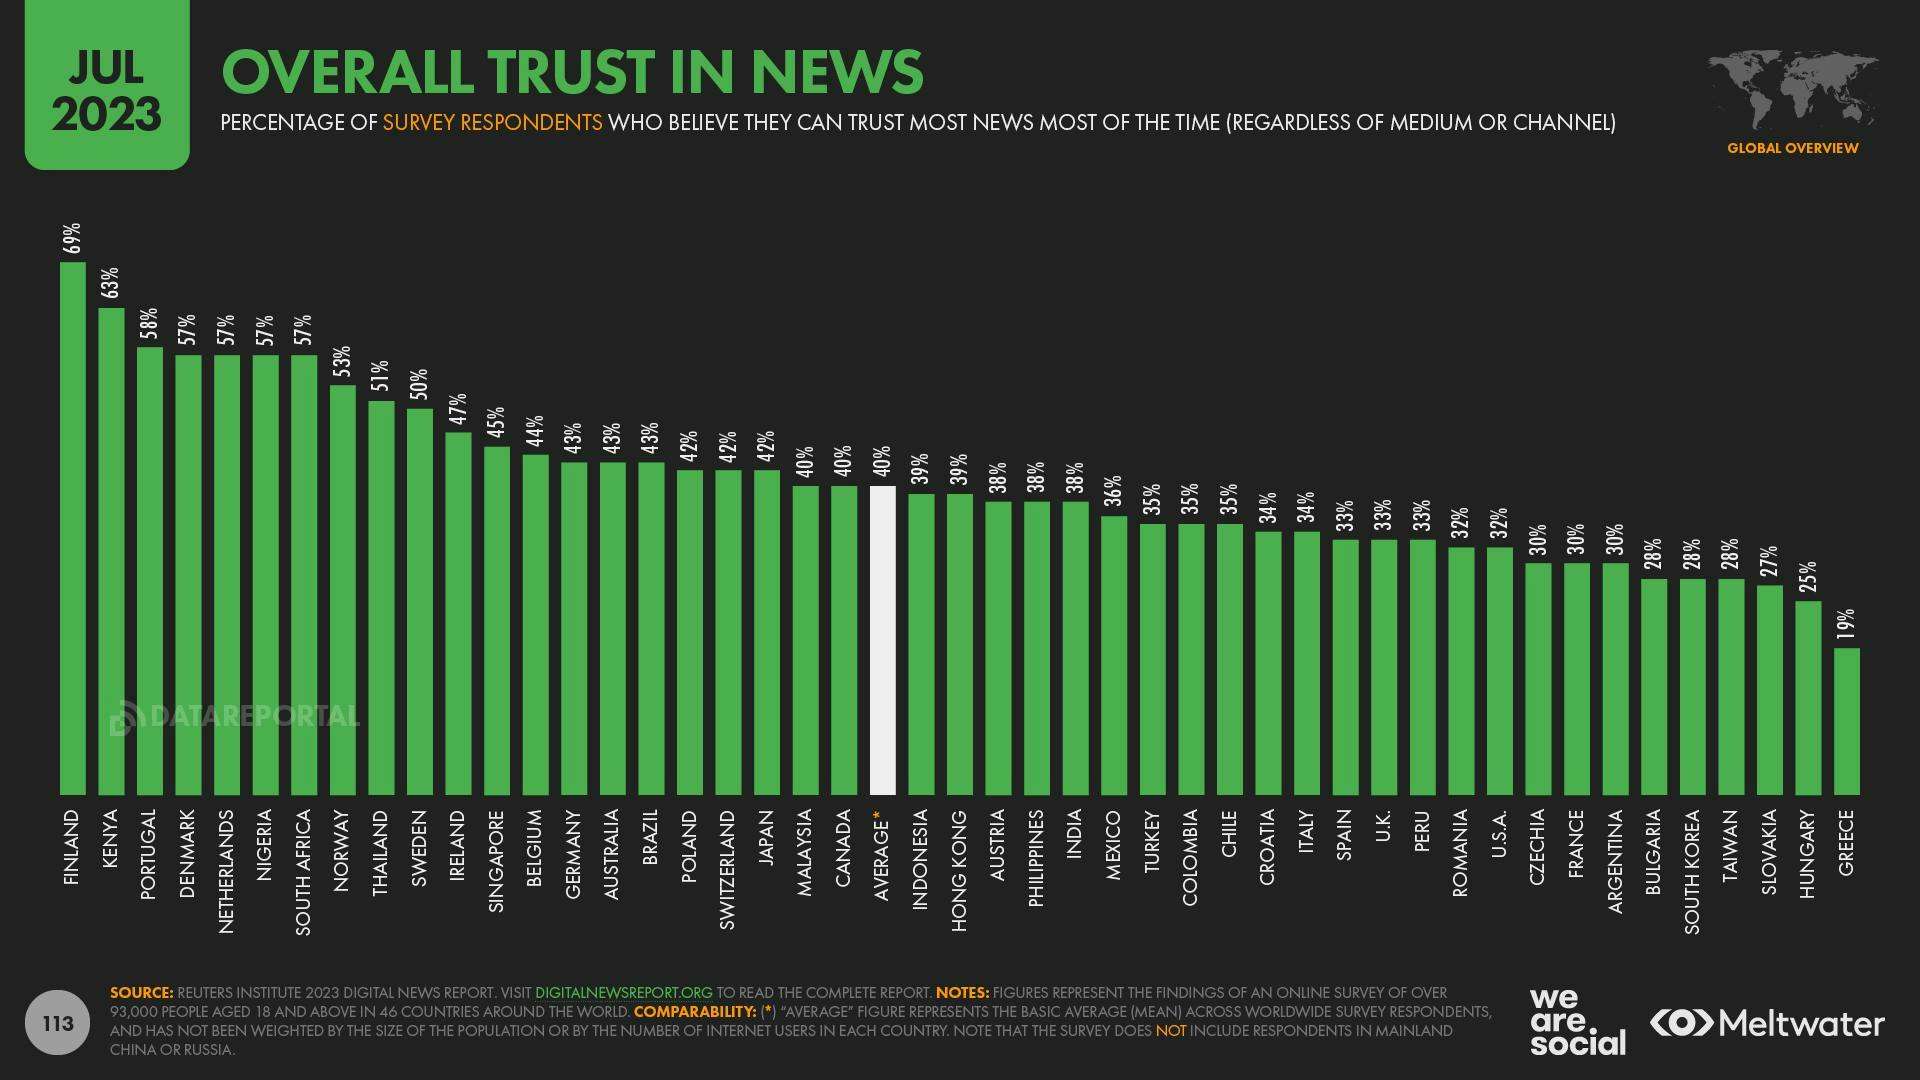 A bar chart showing the percentage of adults who believe they can trust most news most of the time across nations, with a global average of 40%.